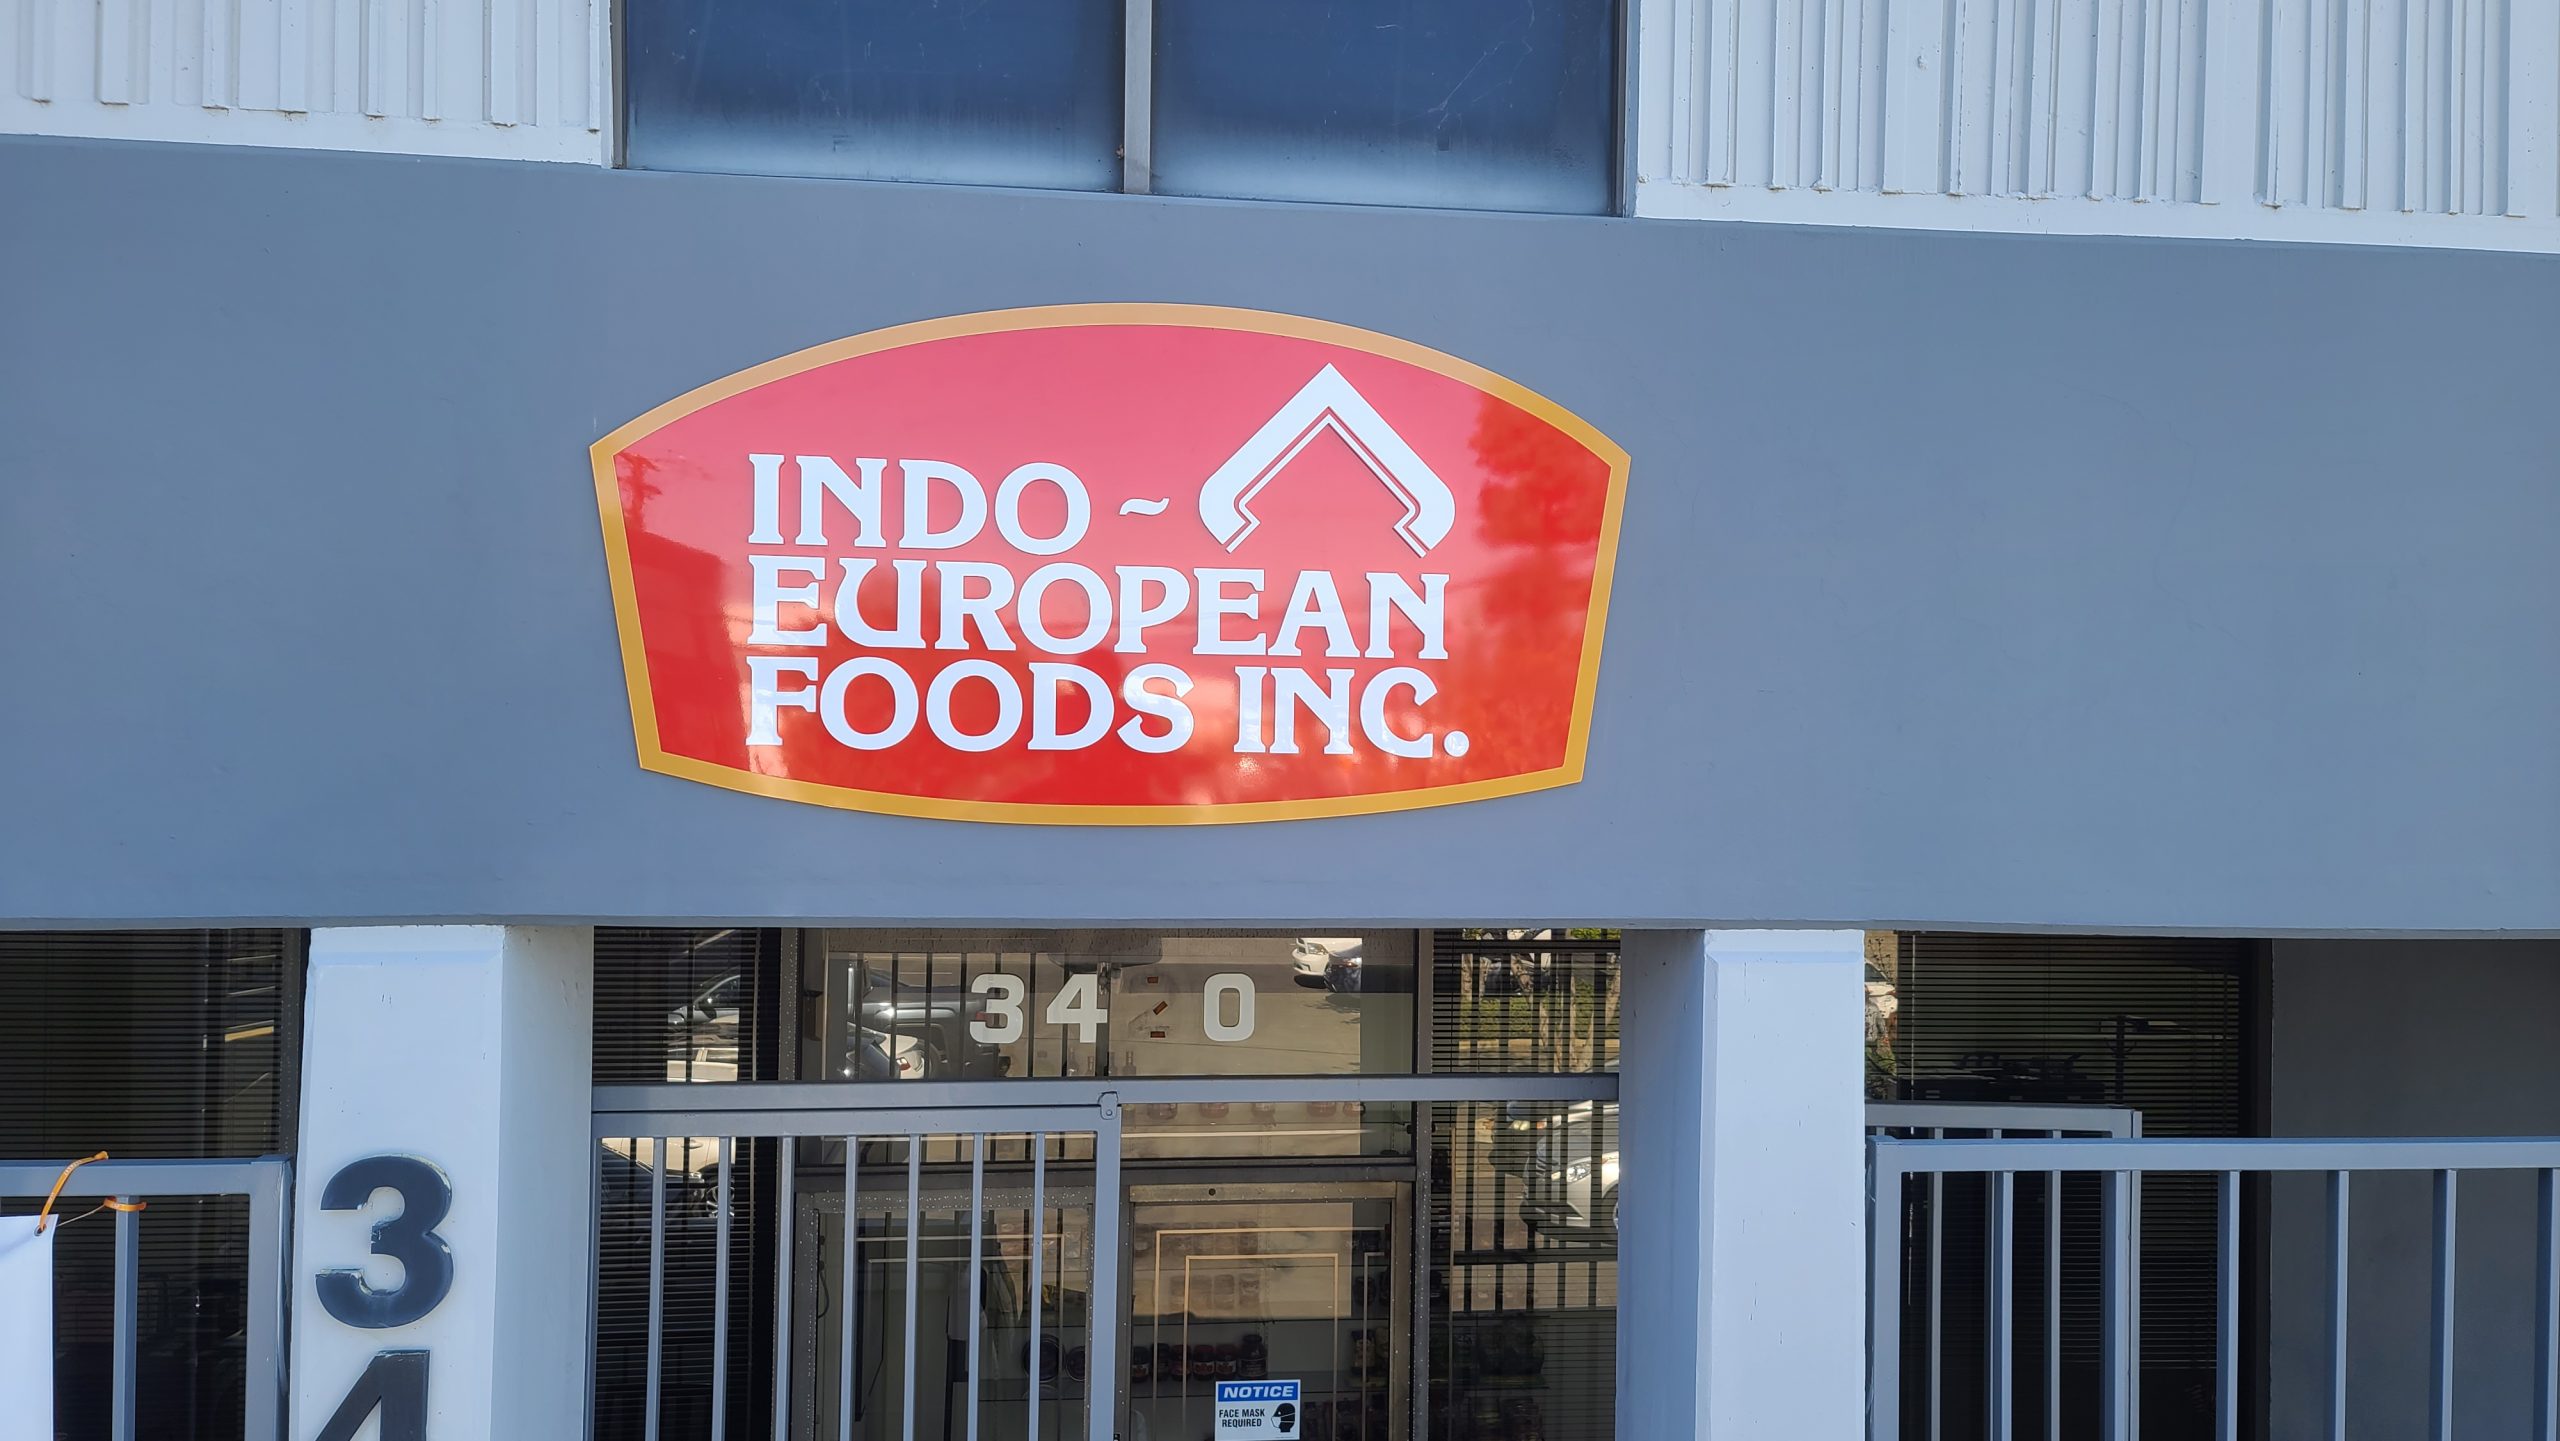 With this custom business sign package Indo-European's establishment in Commerce looks more visually attractive.